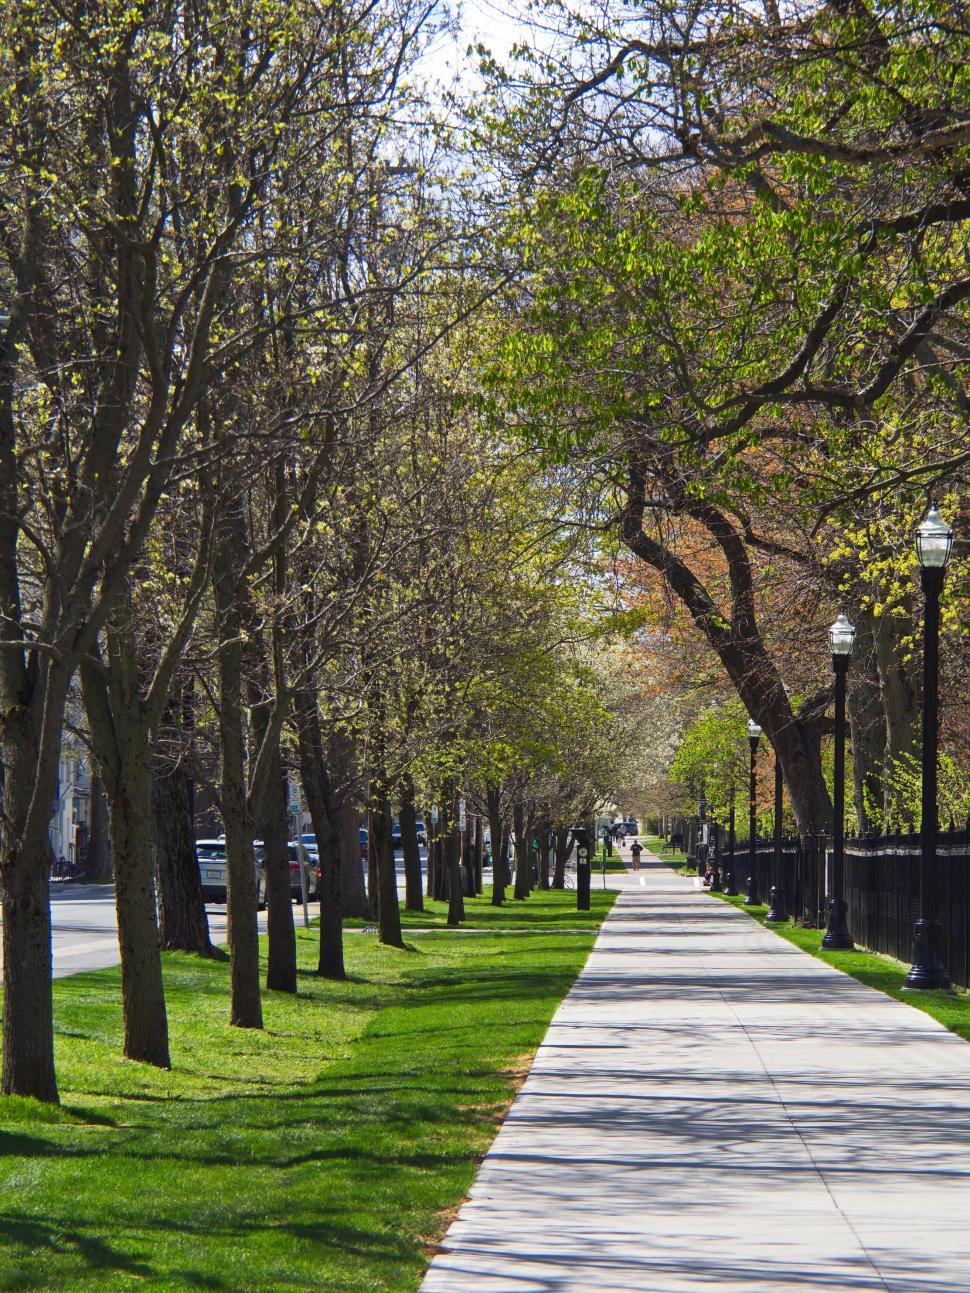 Free Image of Pathway lined with budding green trees 